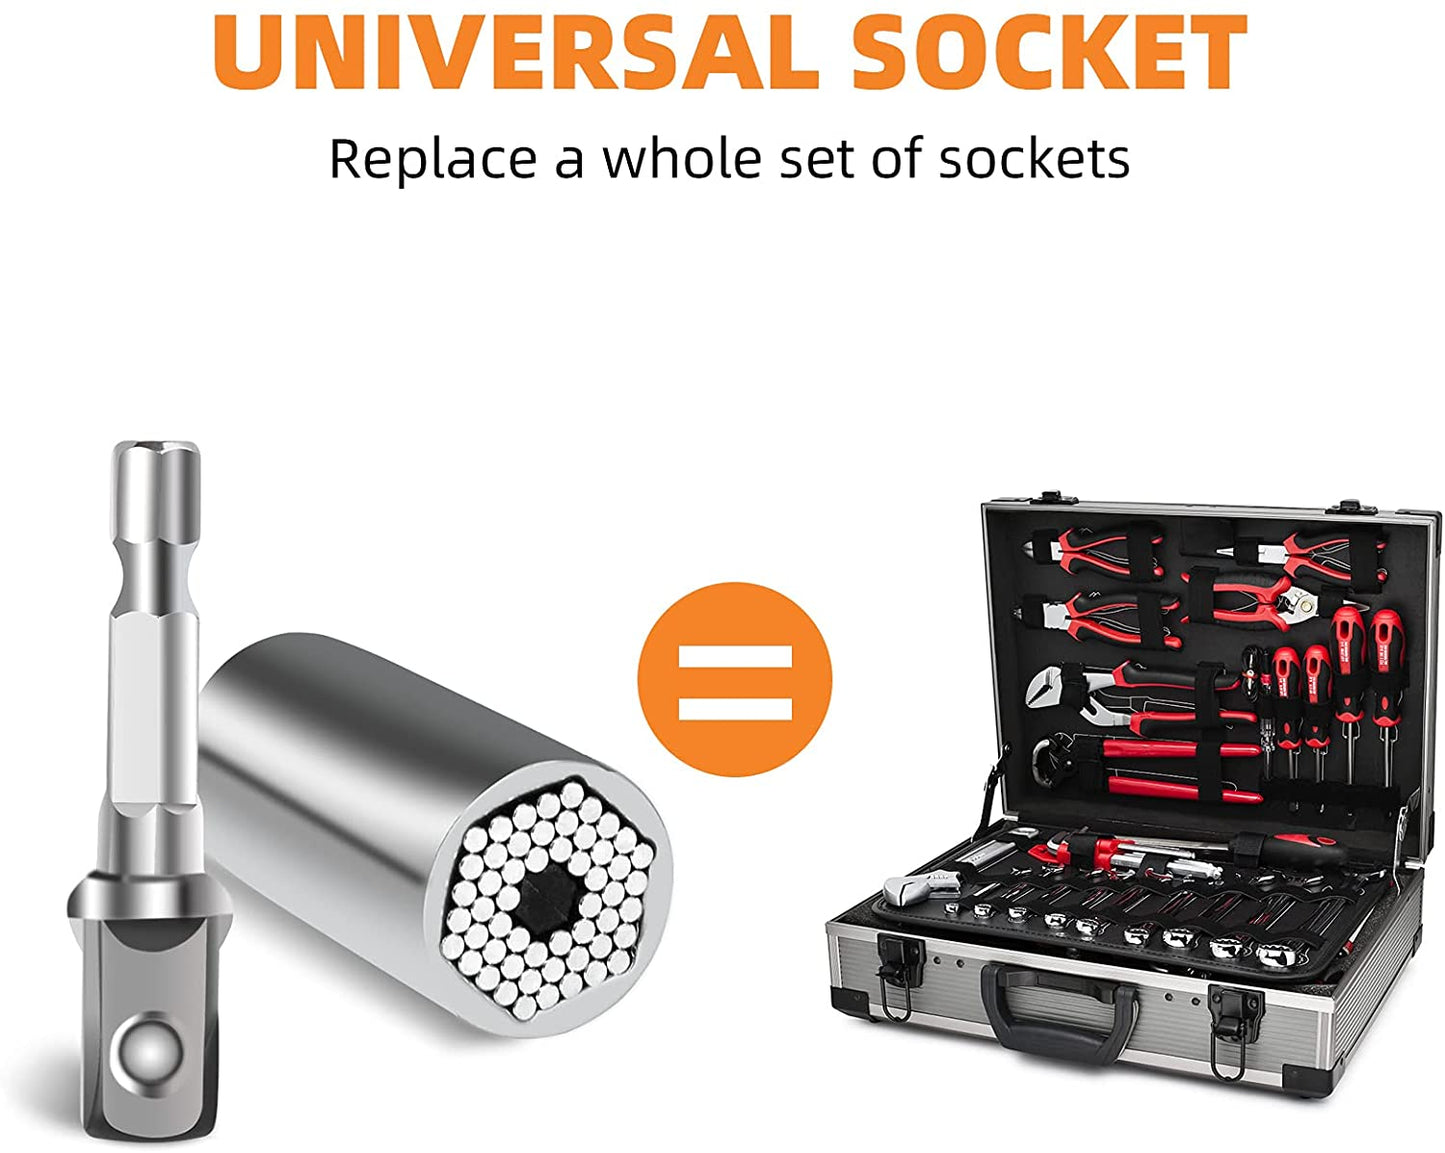 Universal Socket Tool Gift for Dad - Socket Set with Power Drill Adapter Cool Stuff, Super Universal Socket Grip Gadgets 1/4'' - 3/4'' (7-19Mm)